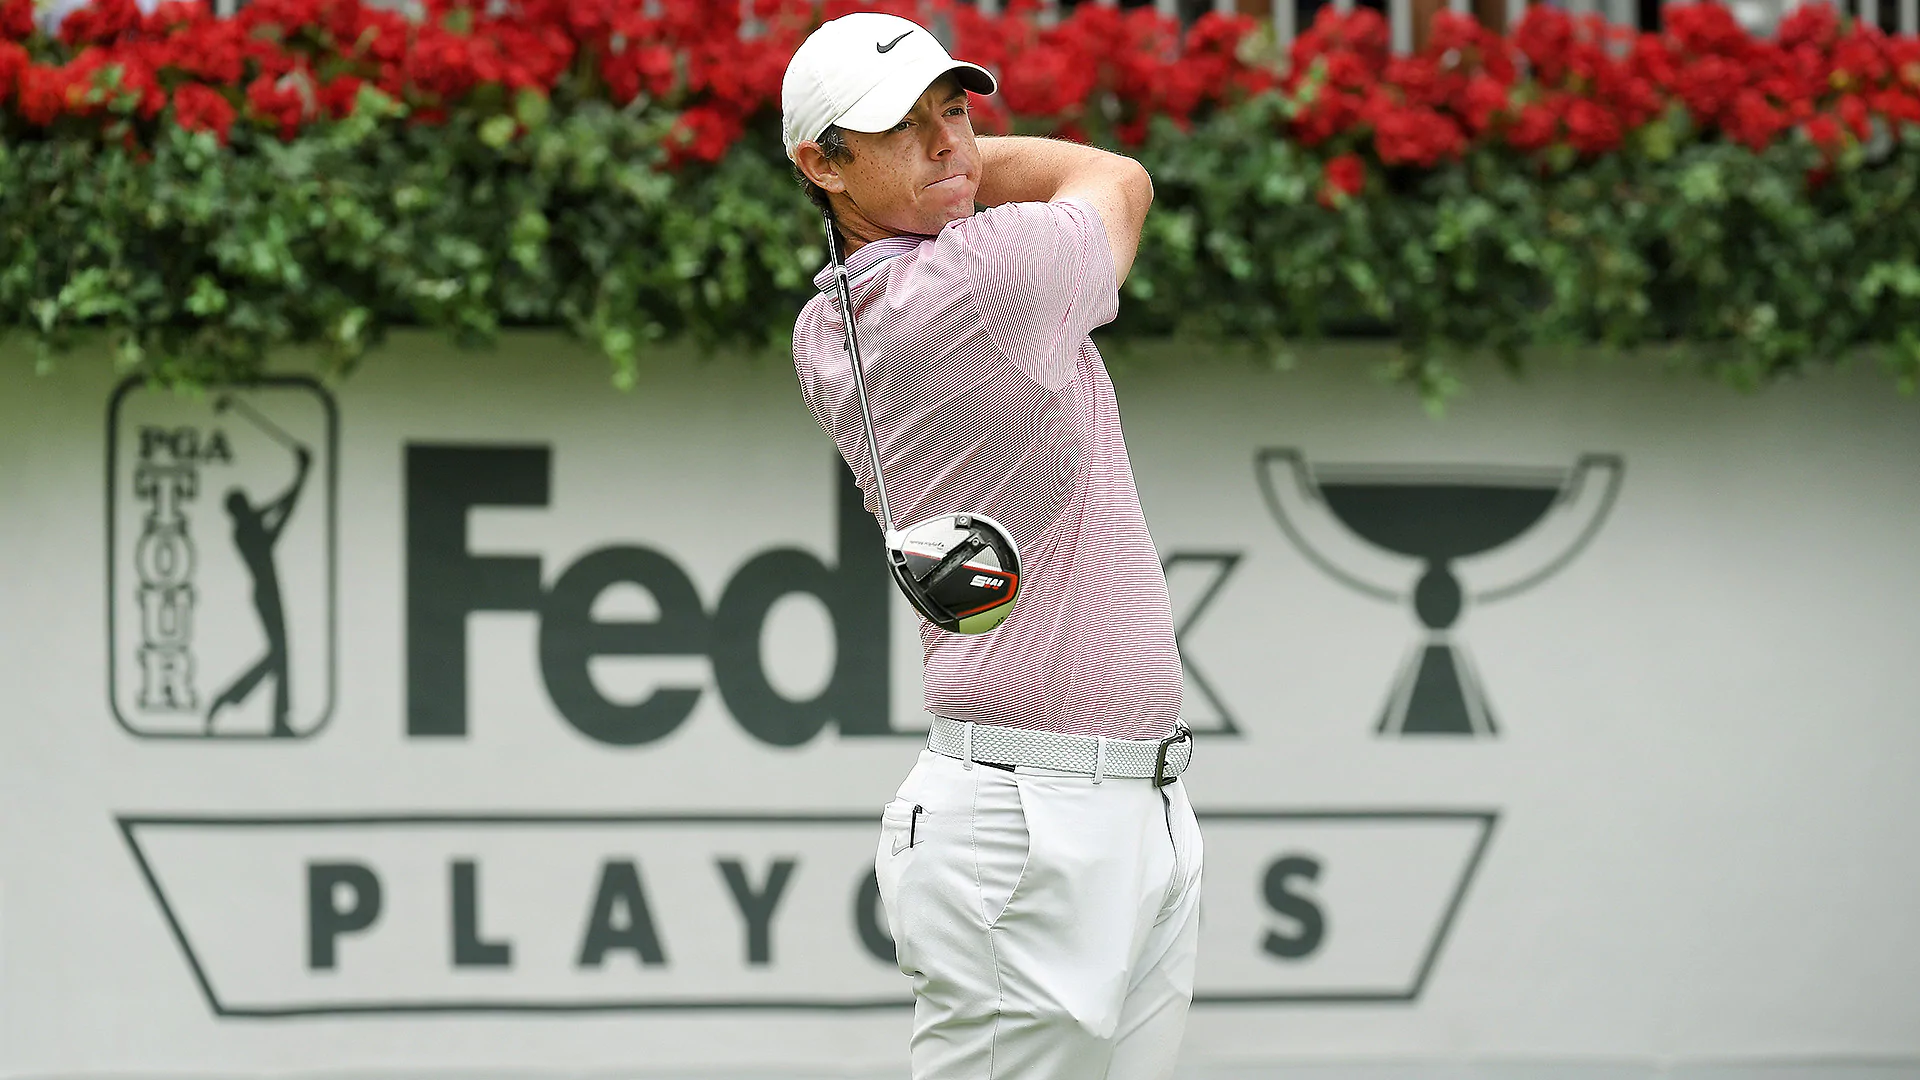 Where would Rory McIlroy rank in other sports in seasonal earnings?